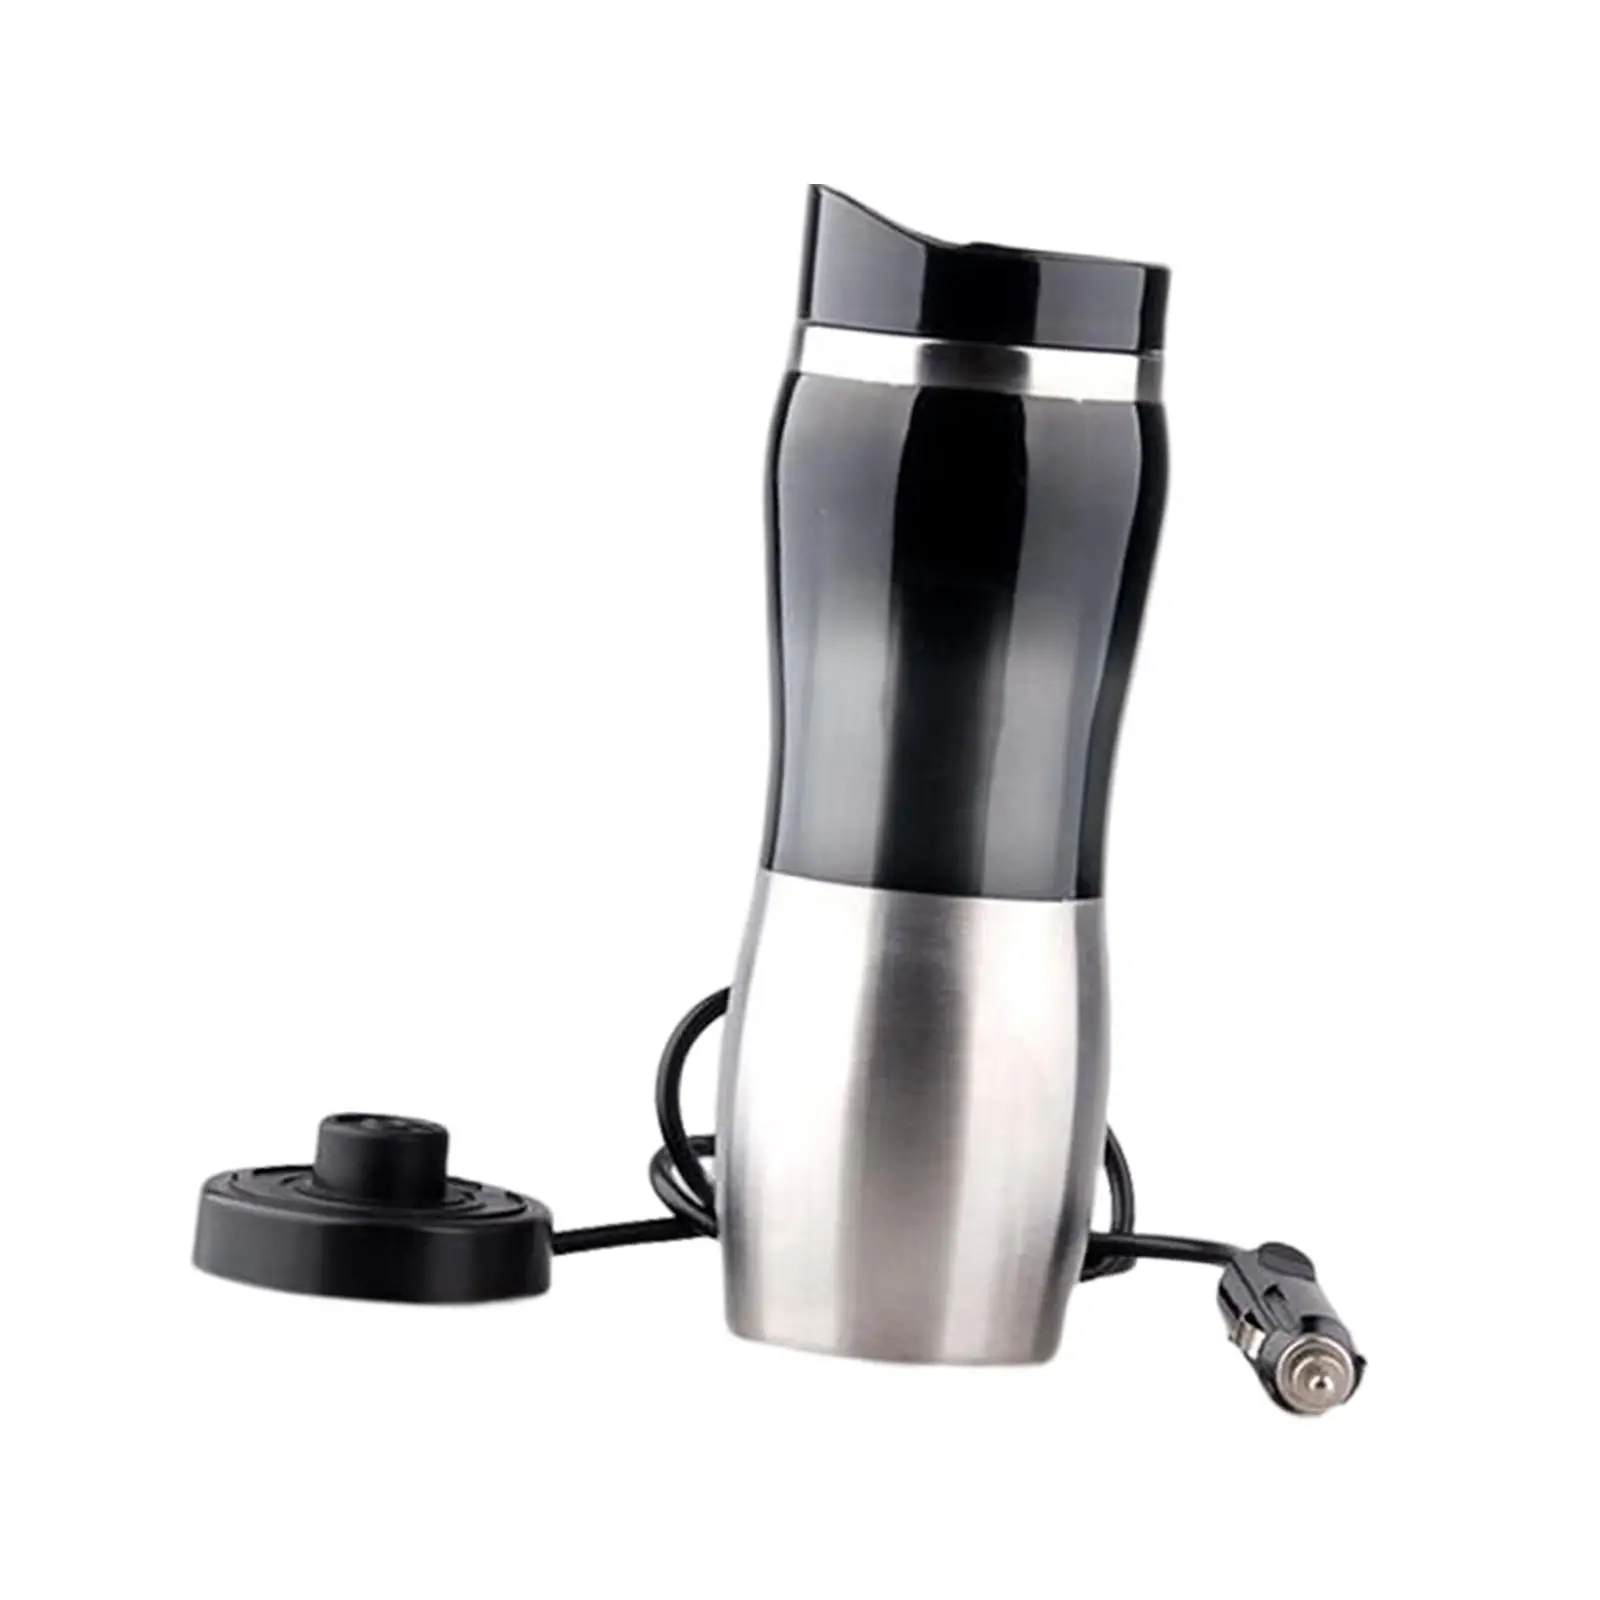 Car Electric Kettle 400ml 12V Portable in Car Electric Car Water Heater Mug for Tea Camping Boat Hot Water Eggs Travel